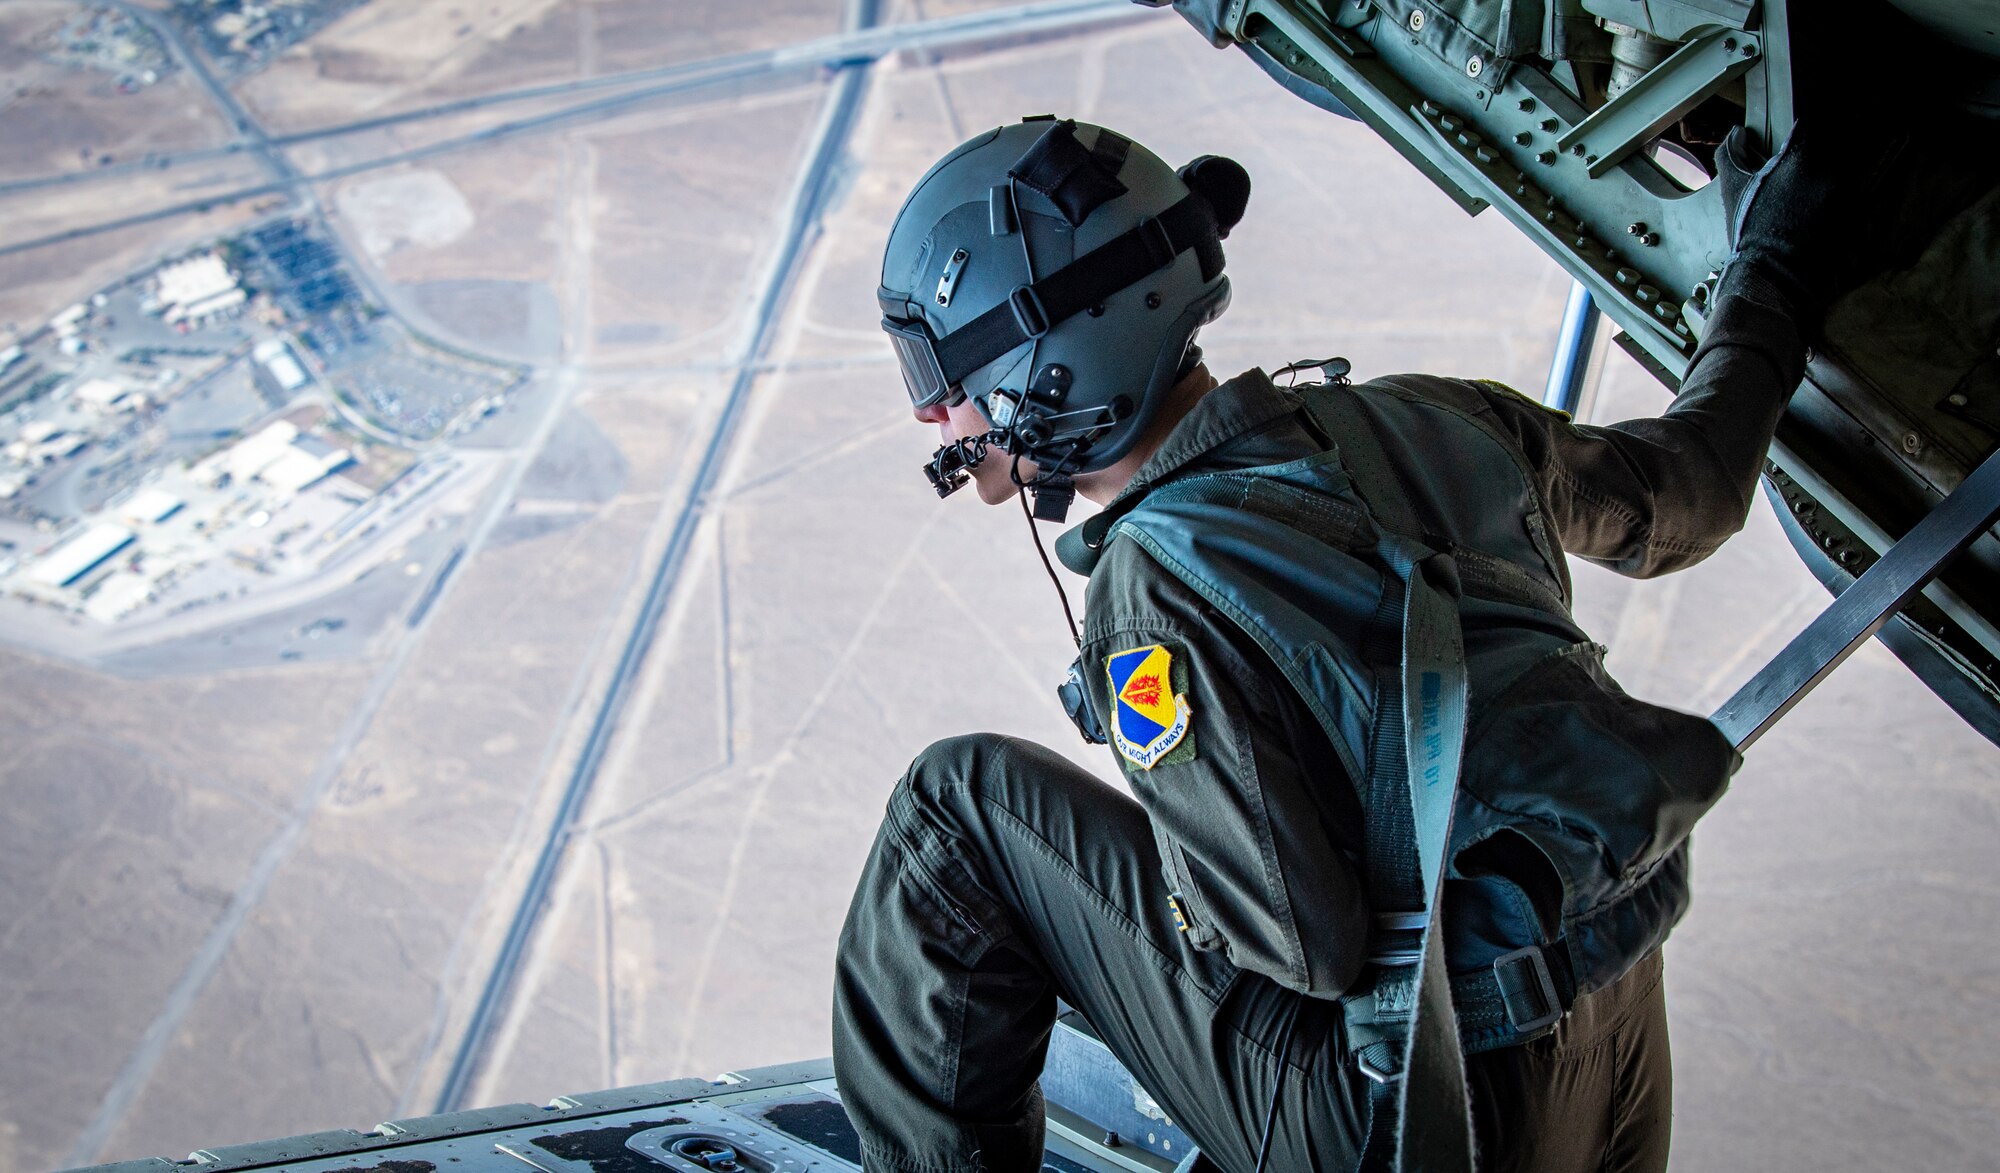 An Airman looks out of the back of an aircraft.